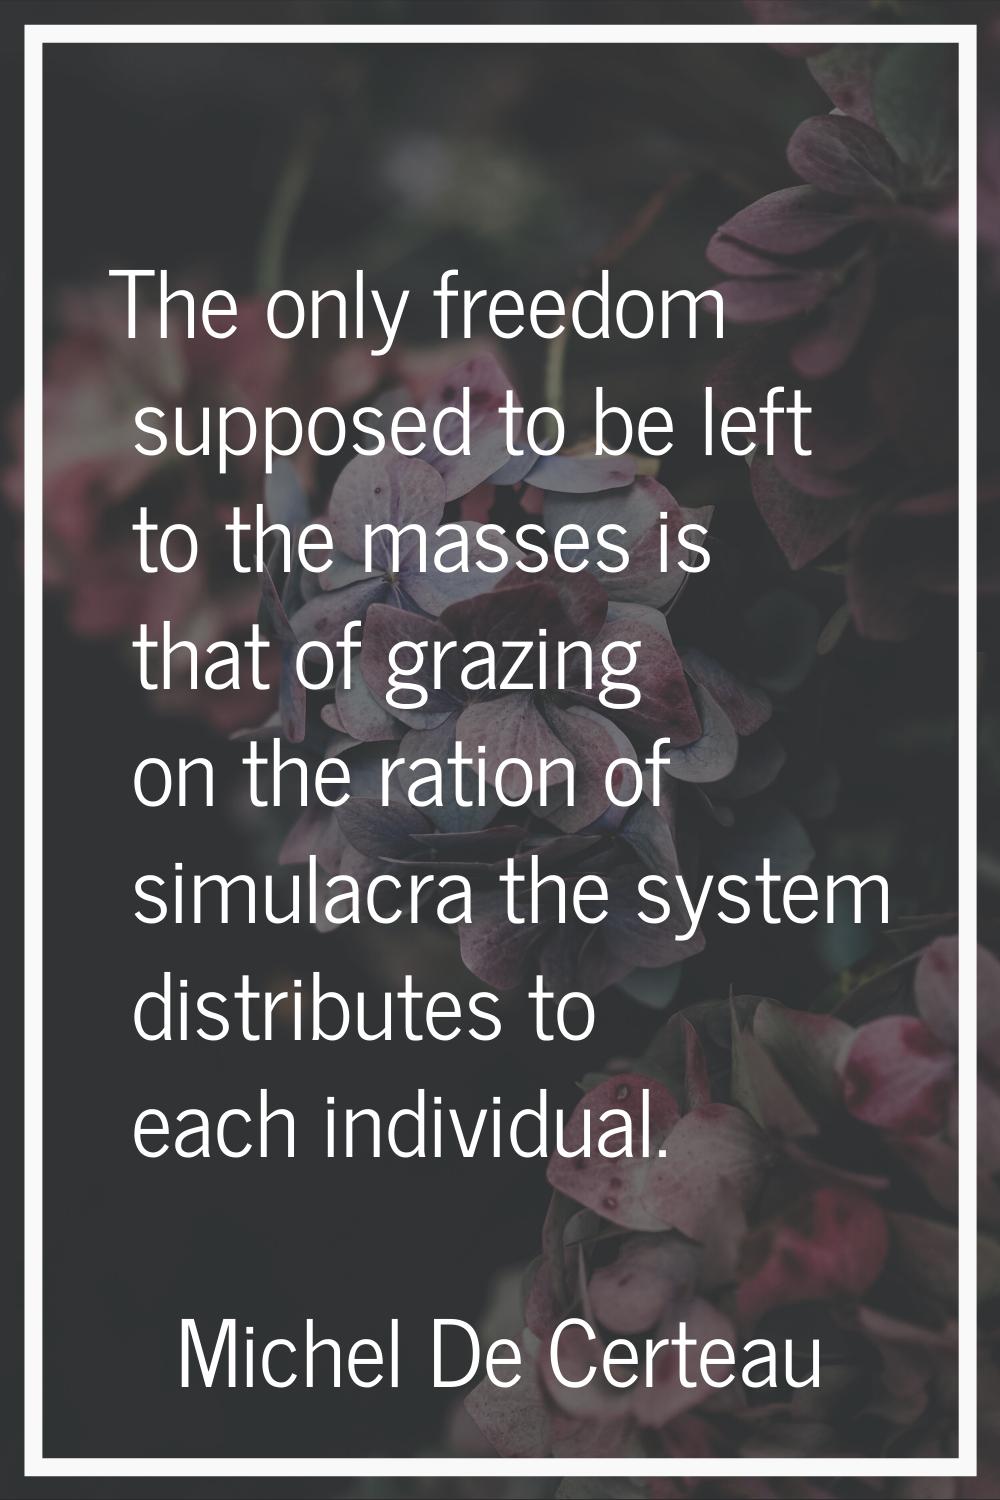 The only freedom supposed to be left to the masses is that of grazing on the ration of simulacra th